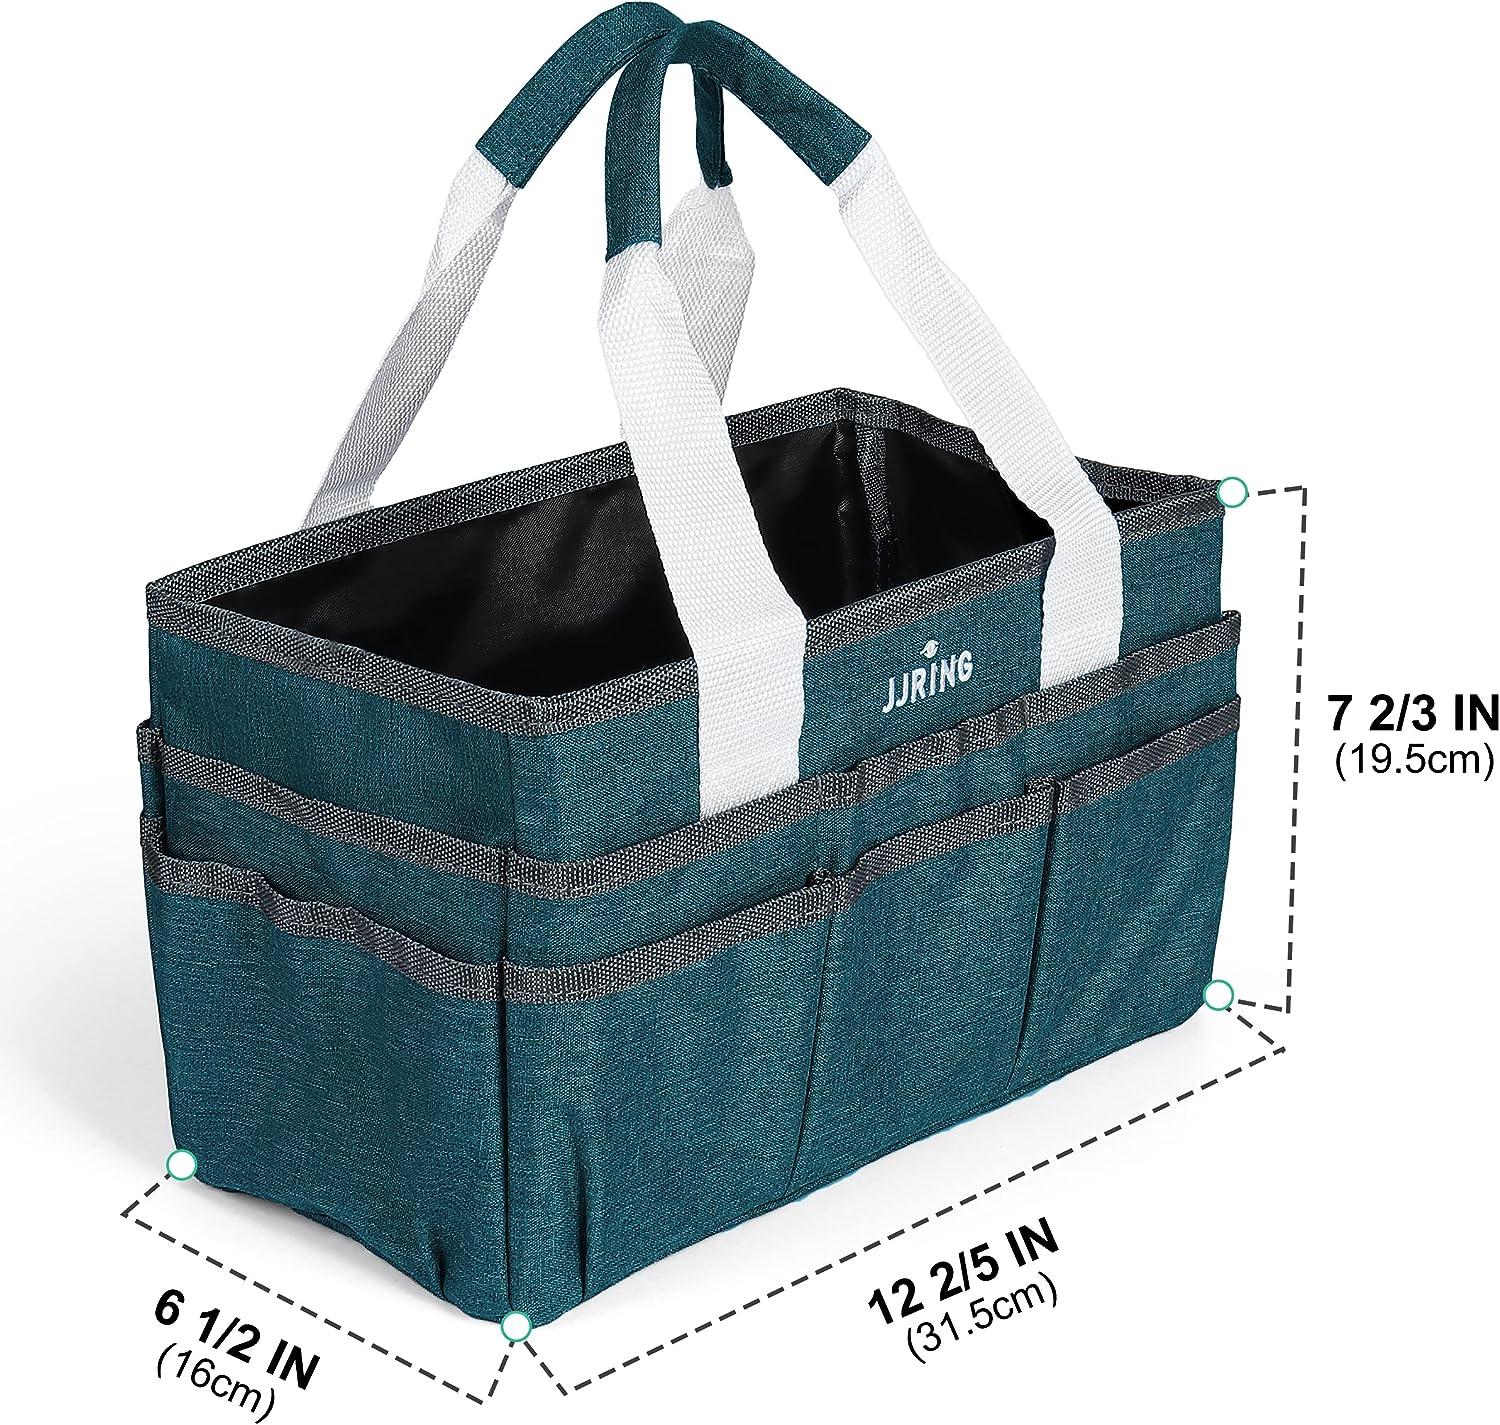 JJRING Craft and Art Organizer Tote Bag - 600D Green Nylon Fabric Art Caddy with Pockets - for Art, Craft, Sewing, Medical, and Office Supplies